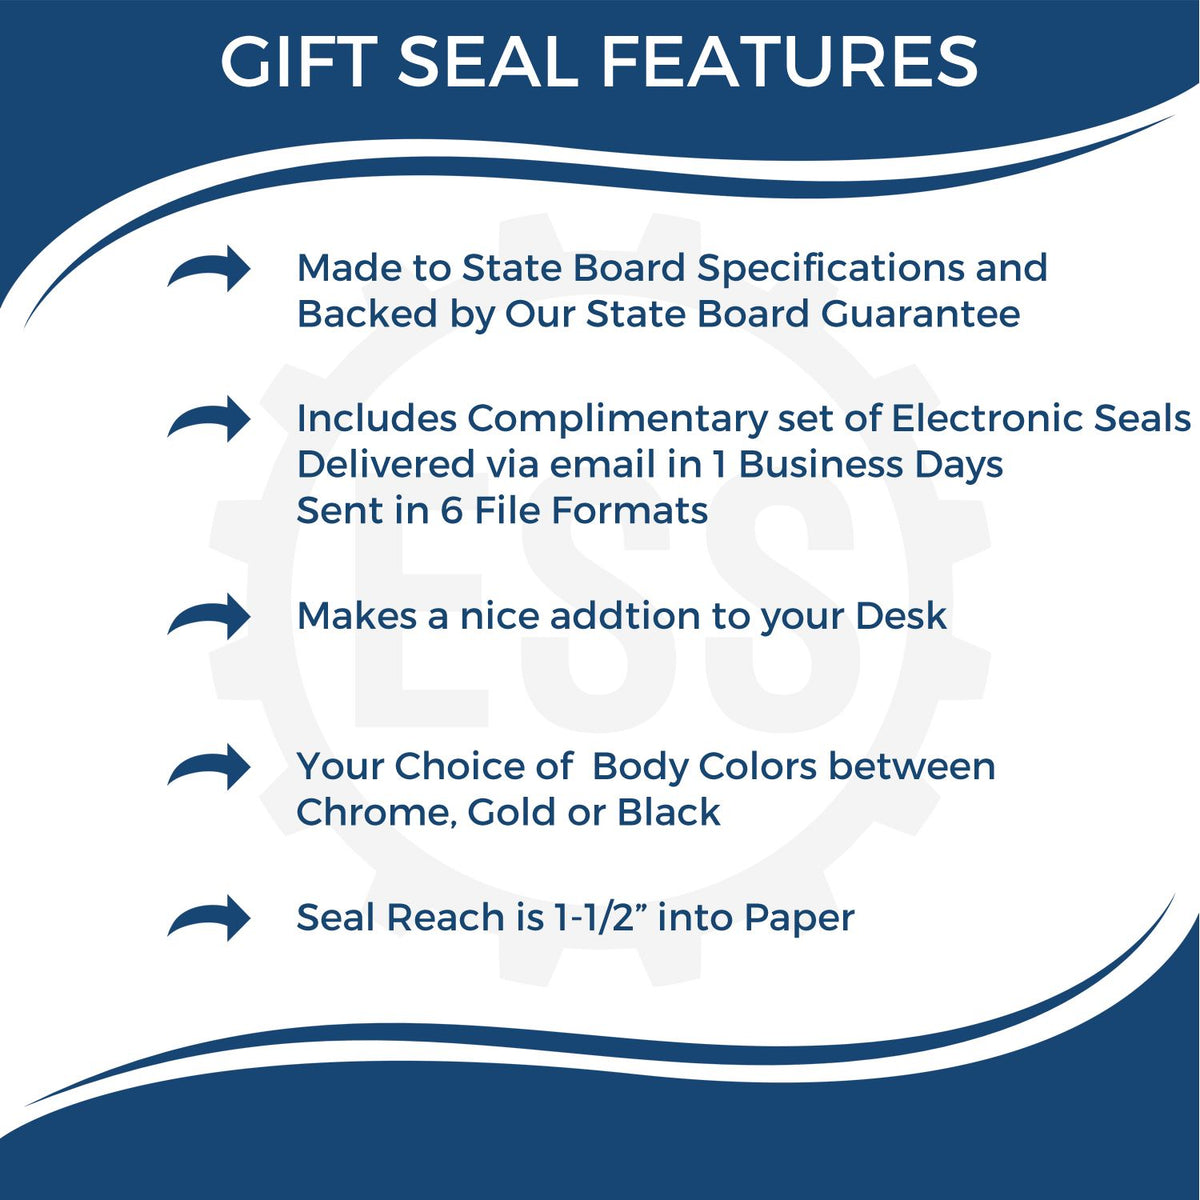 A picture of an infographic highlighting the selling points for the Gift Arizona Geologist Seal